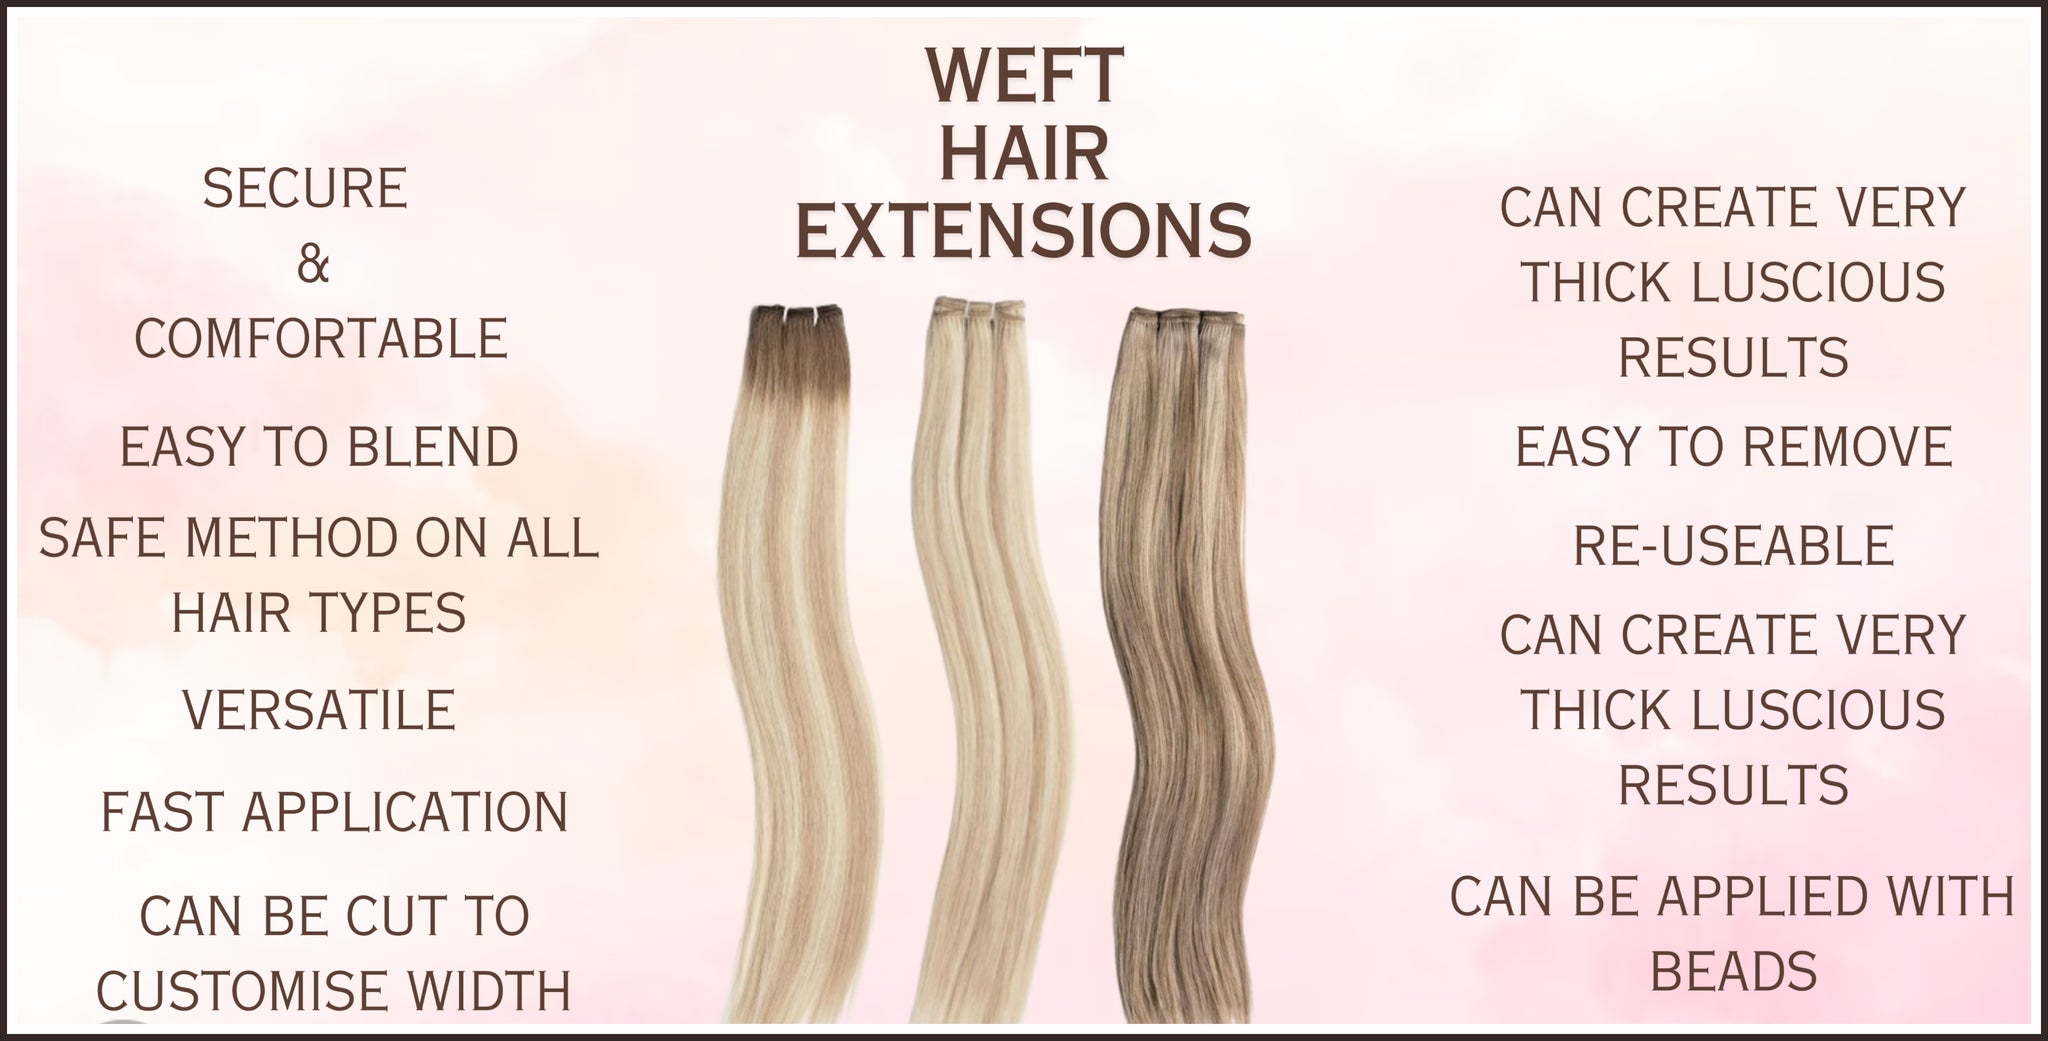 THE BENEFITS OF WEFT HAIR EXTENSIONS